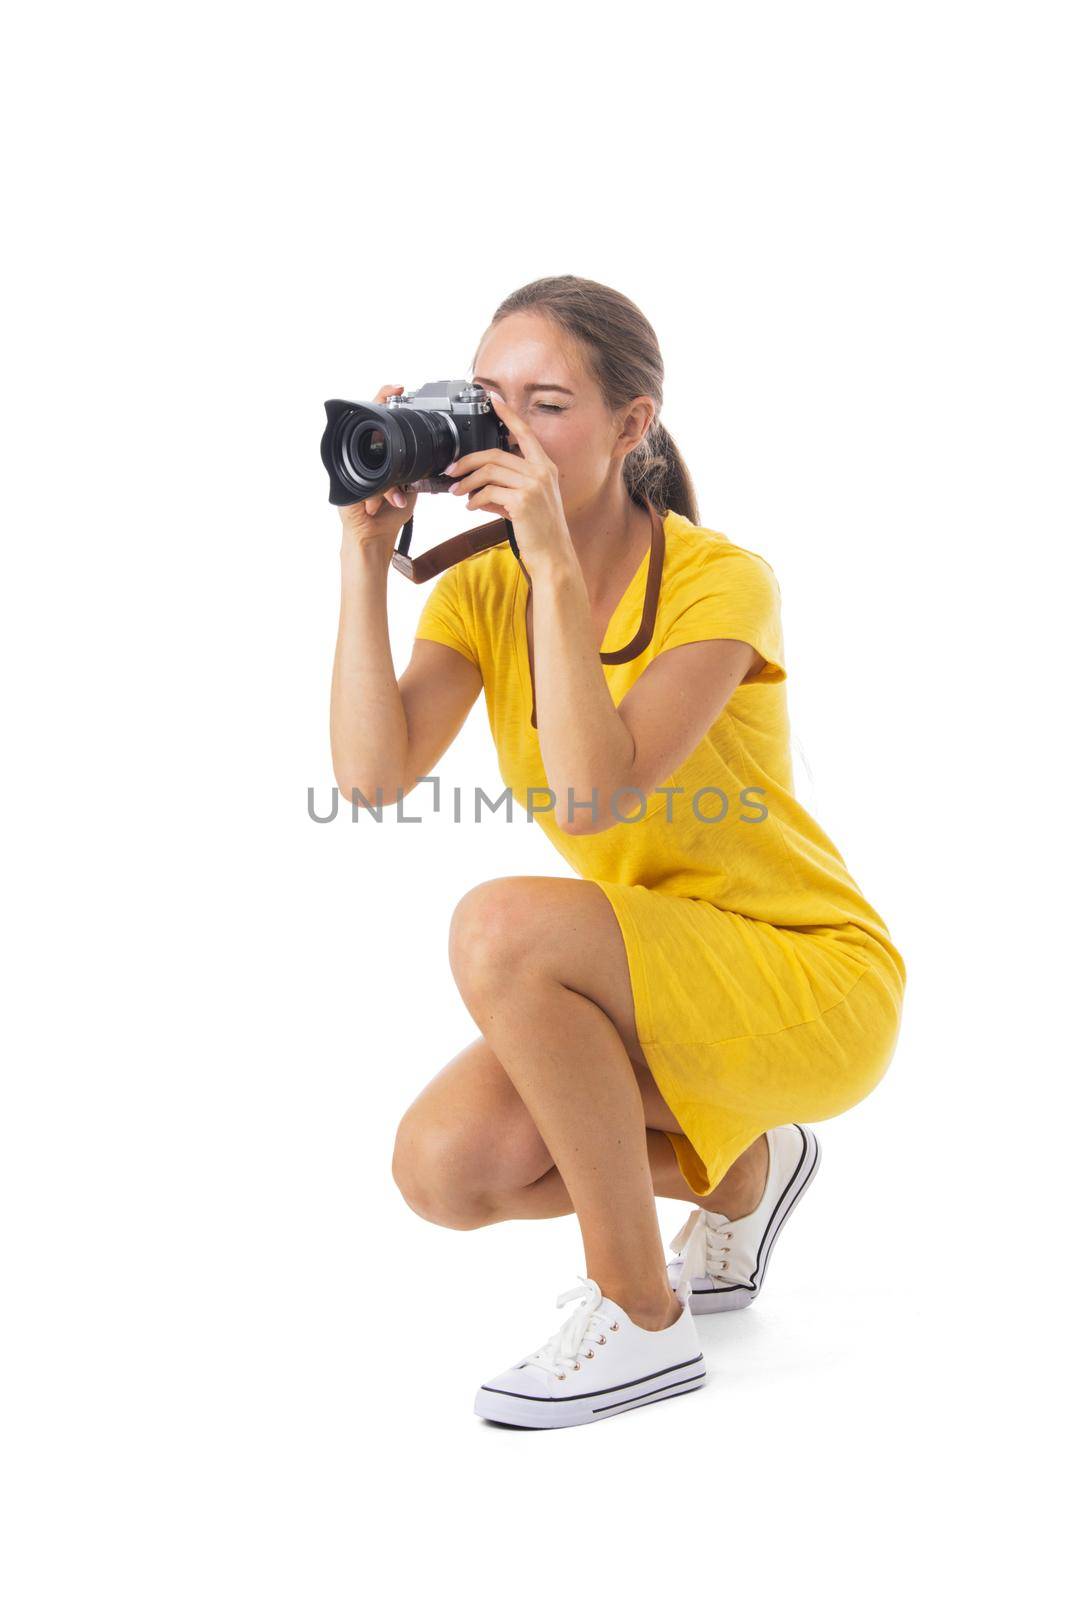 Young woman takes images with photo camera by ALotOfPeople